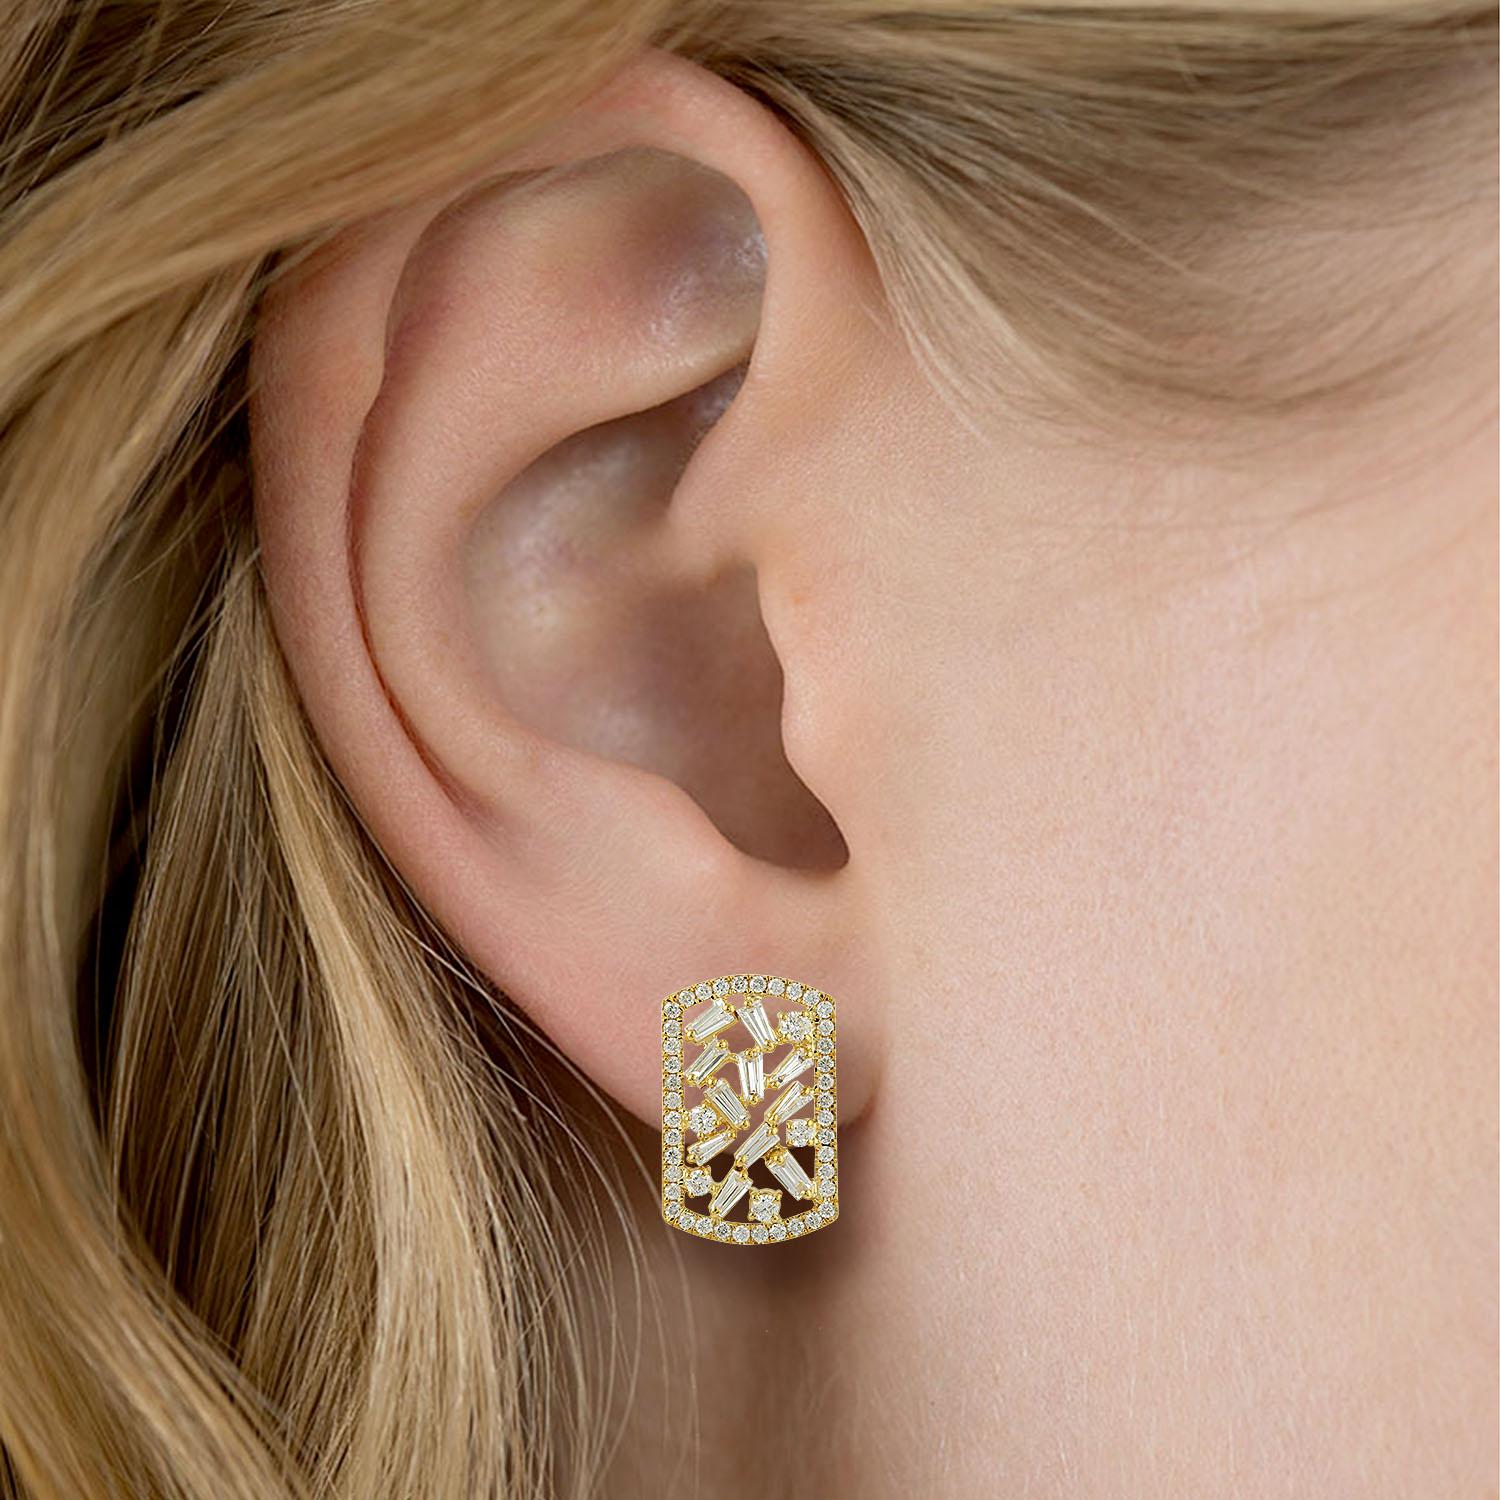 These stud earrings are handmade in 18-karat gold and set with 1.1 carats of sparkling baguette diamonds. 

FOLLOW  MEGHNA JEWELS storefront to view the latest collection & exclusive pieces.  Meghna Jewels is proudly rated as a Top Seller on 1stdibs